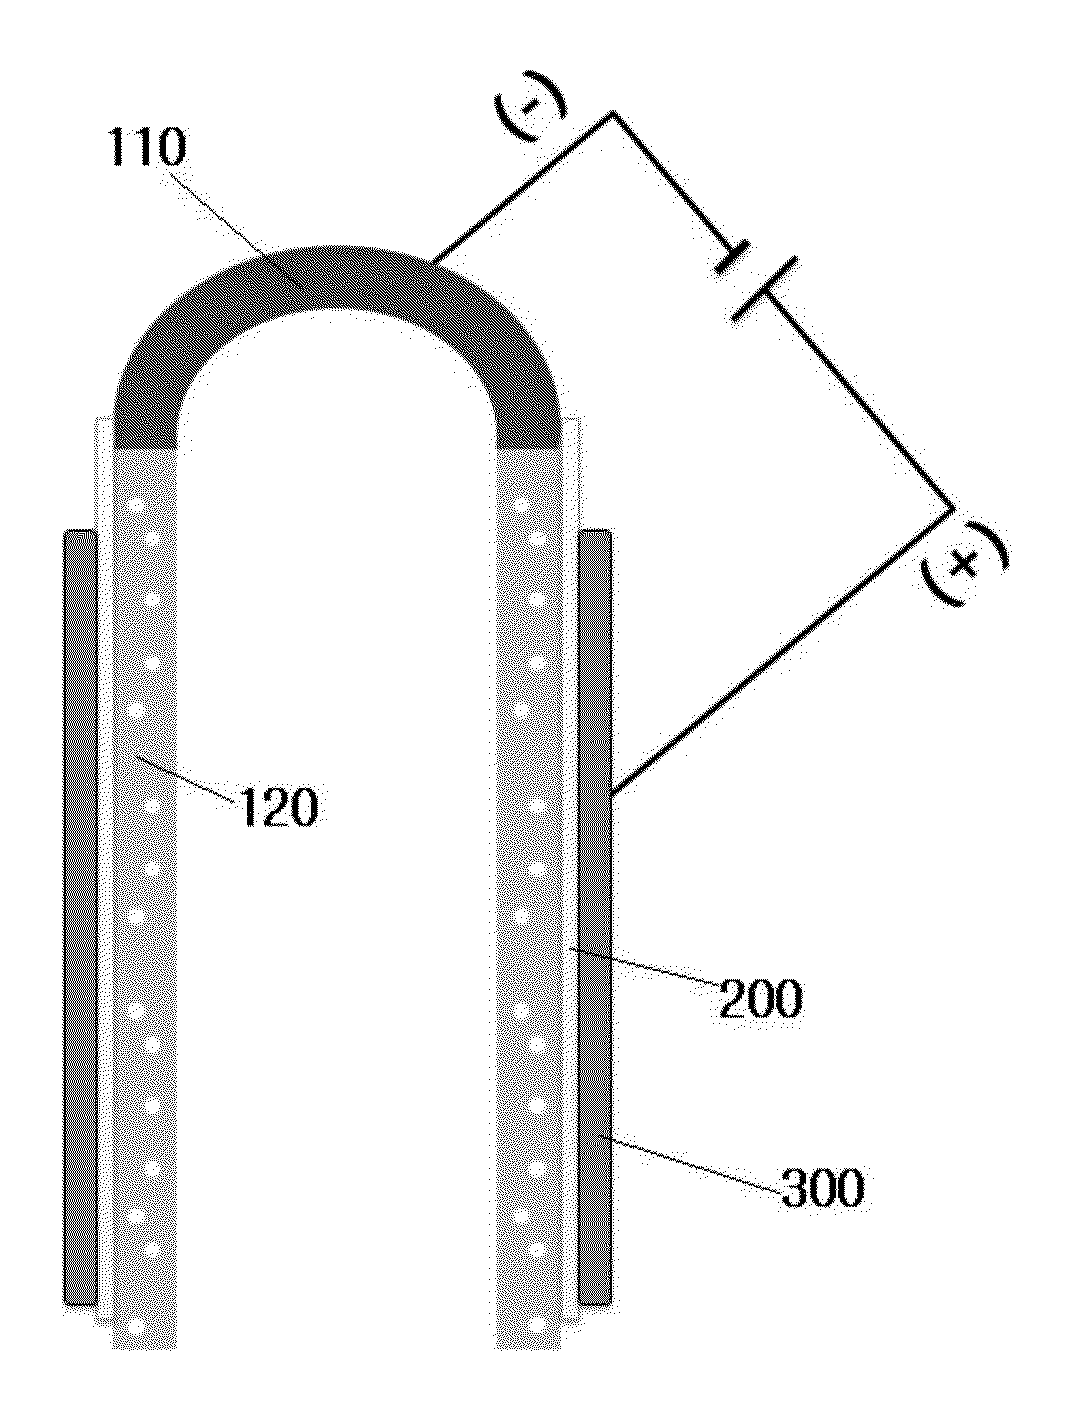 Amtec unit cell with partially opened internal electrode and method for manufacturing the amtec cell